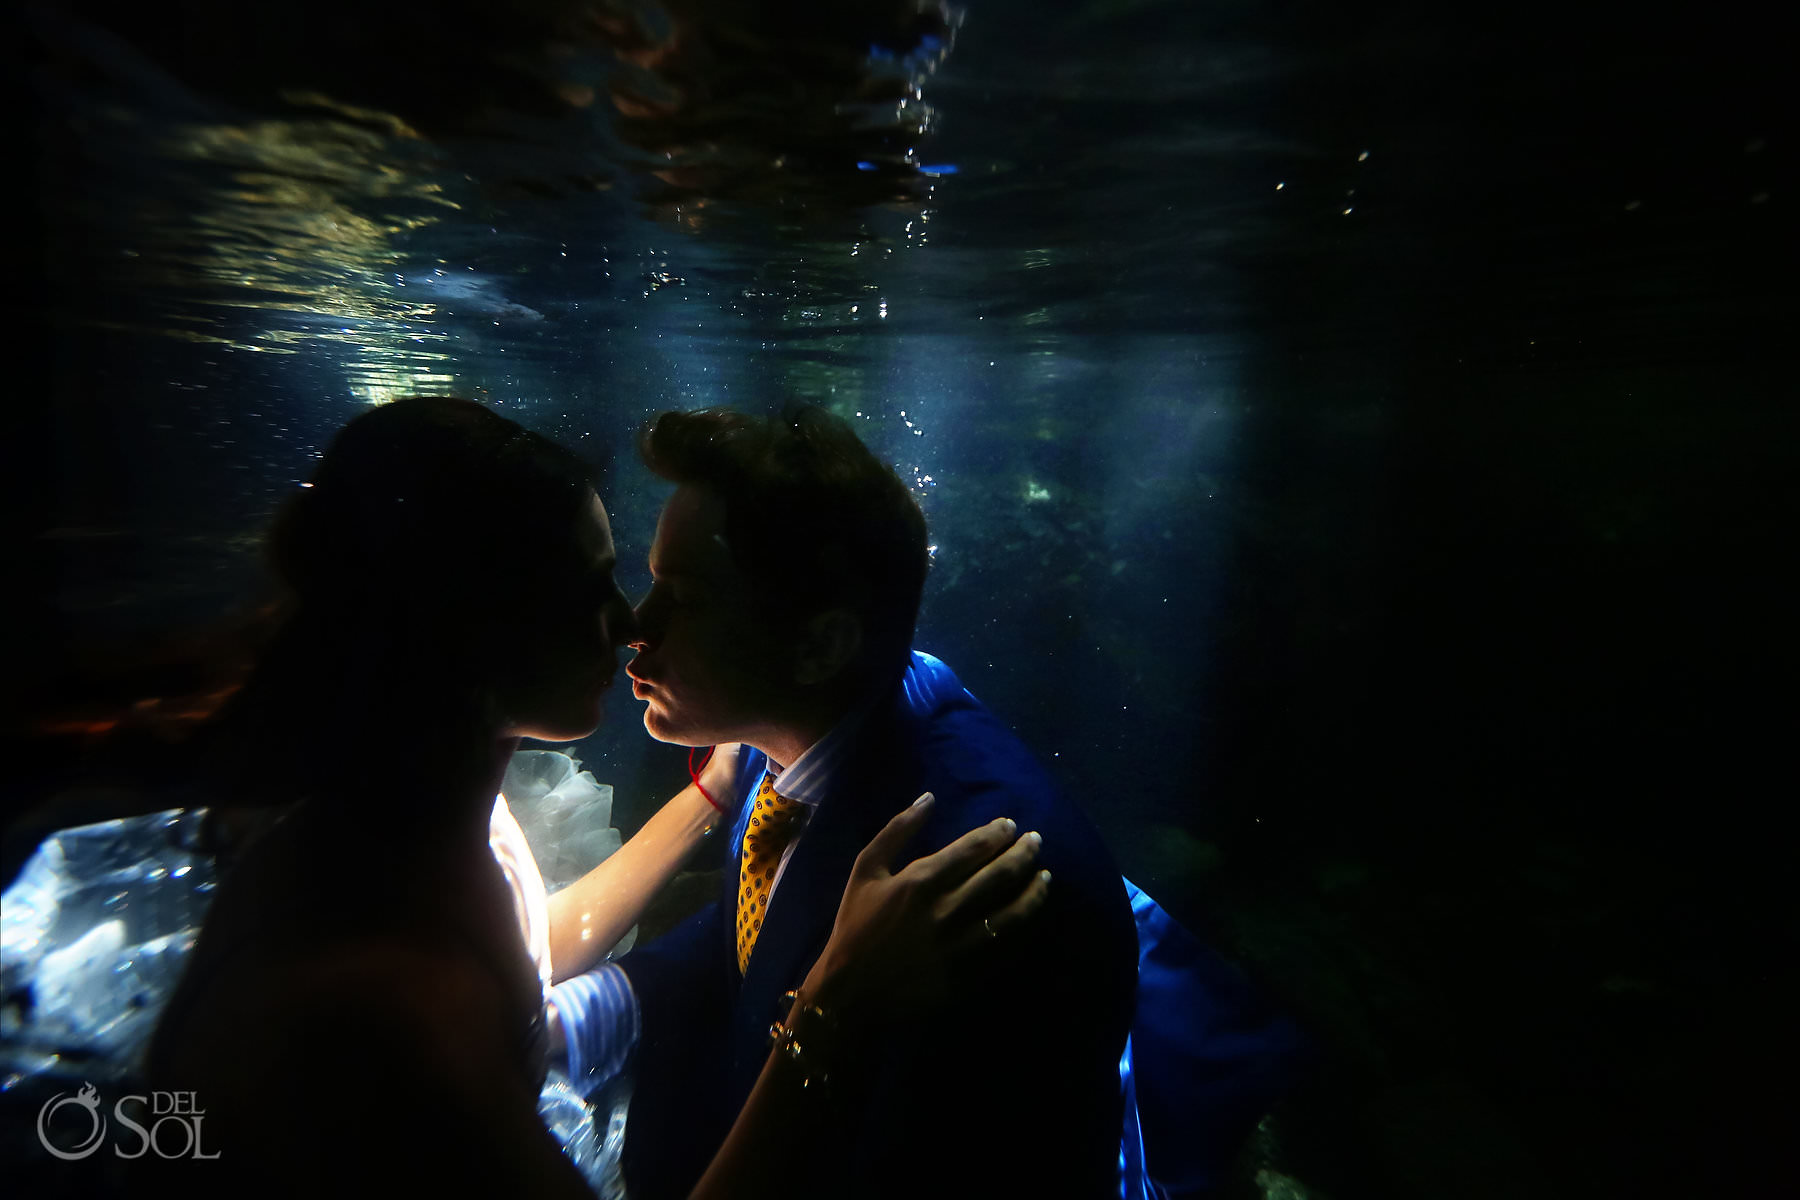 Eloping in Mexico Underwater and kissing